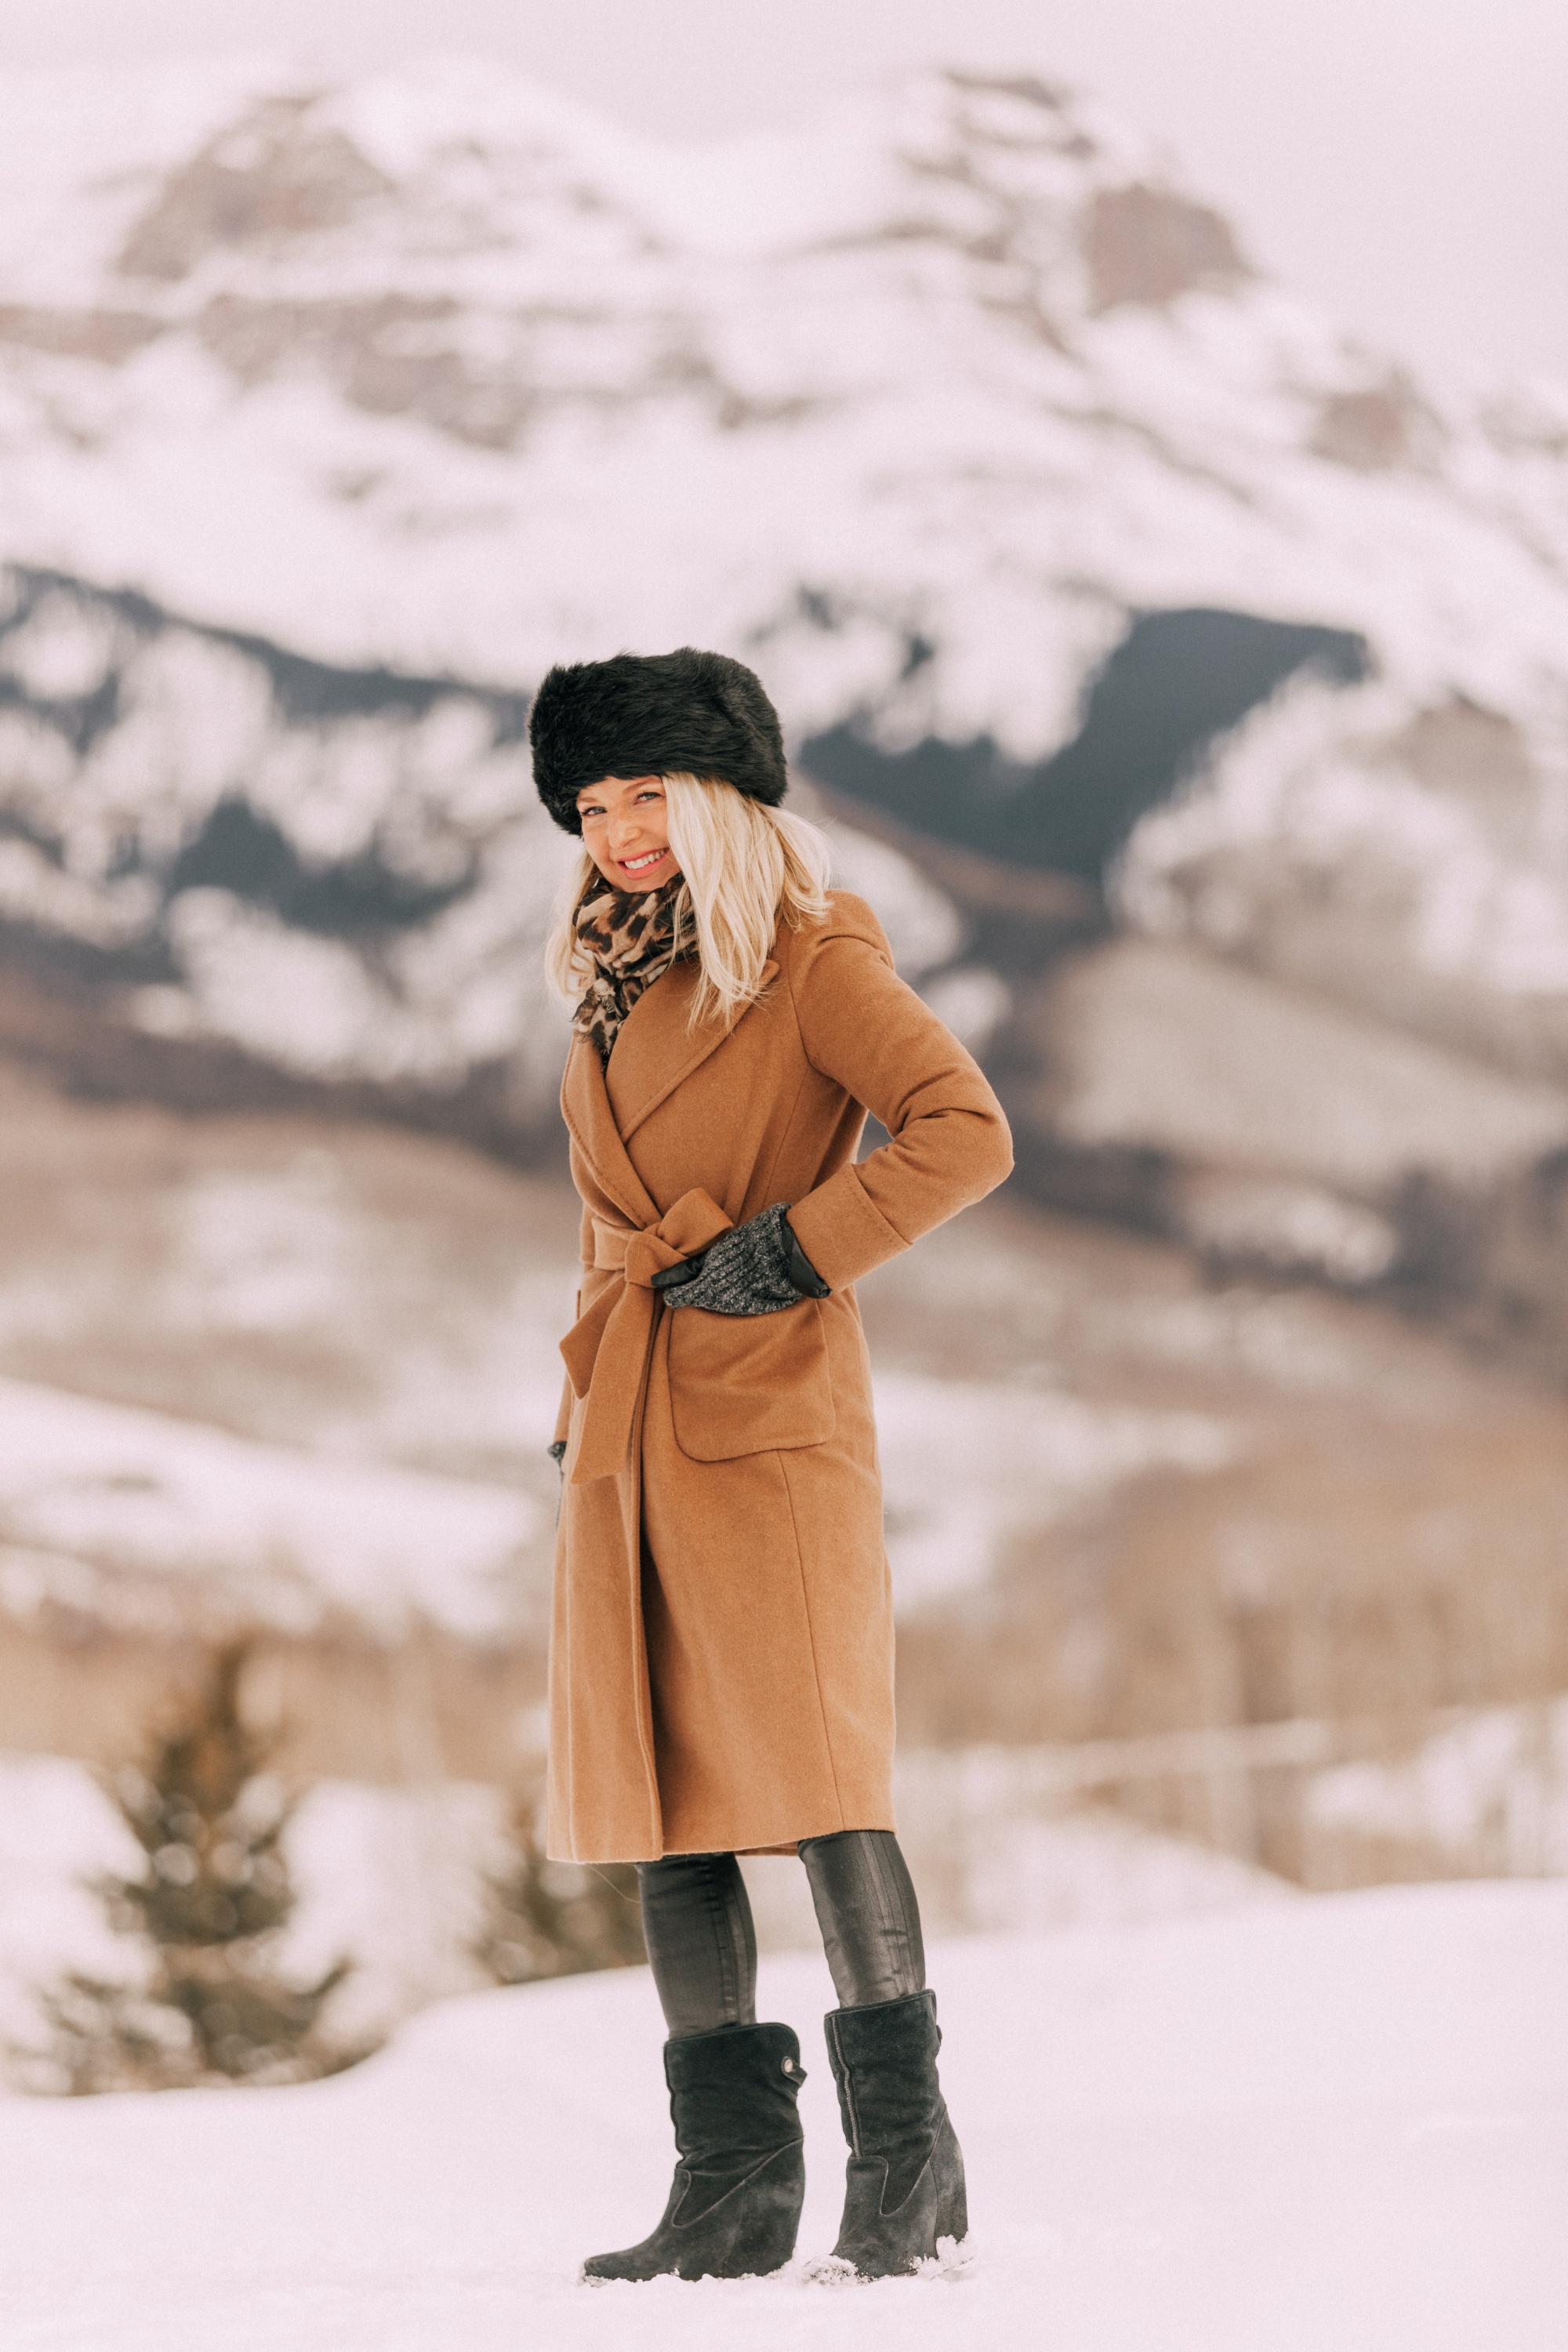 how to layer winter clothes to stay warm and look stylish, cold weather outfit black turtleneck sweater Citizens of Humanity Rocket leatherette skinny jeans, Ugg wedge boots, camel wool Mackage coat Mackage, and Herno puffer coat in Telluride, CO